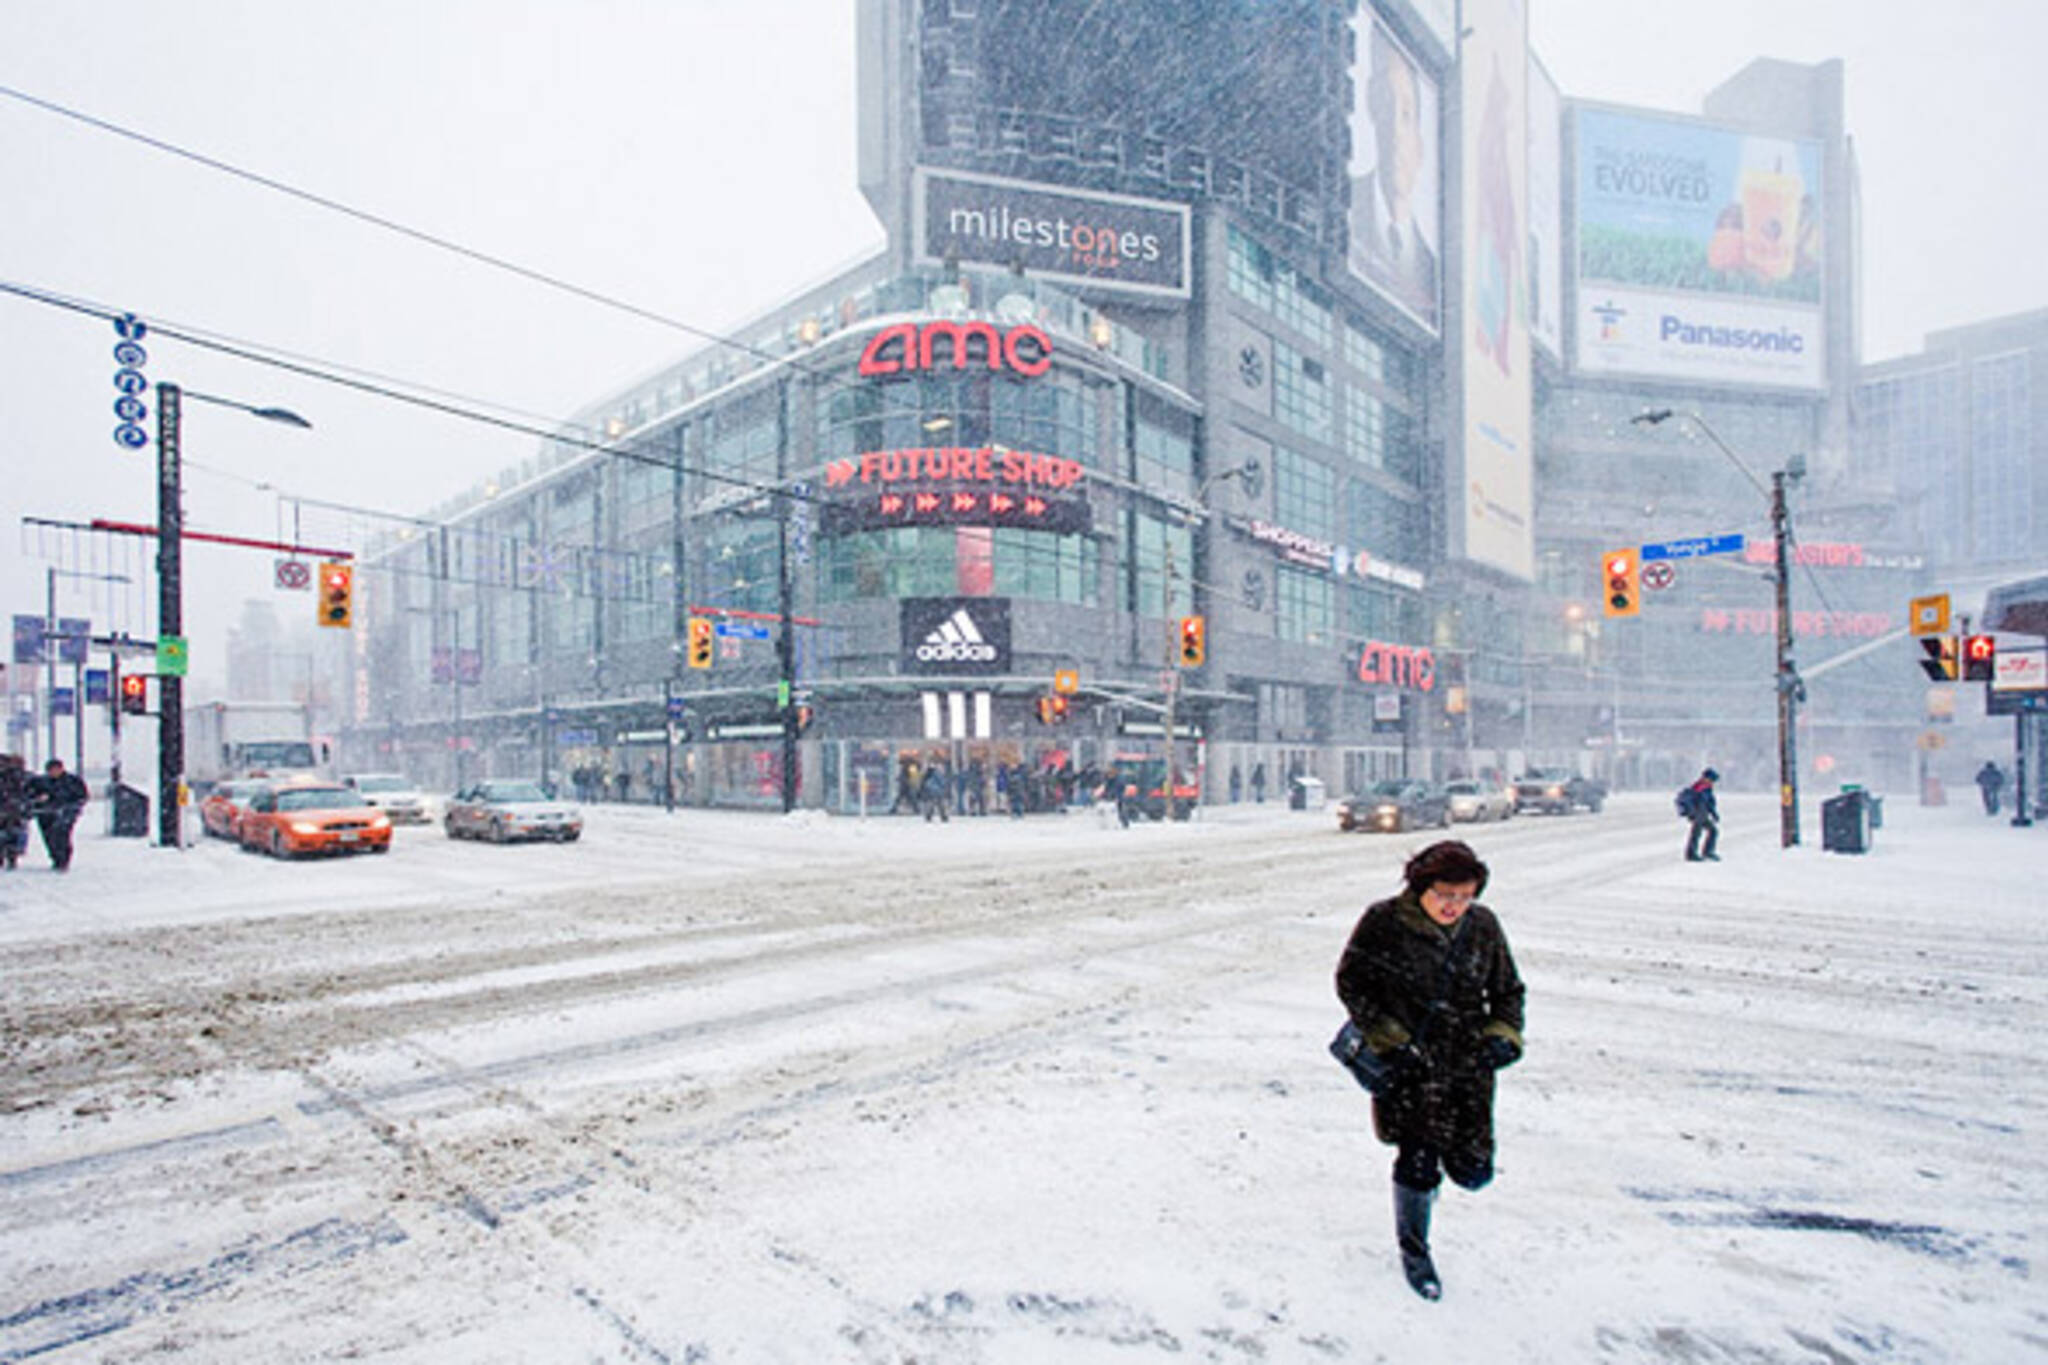 Toronto Escapes November Without Snowfall, But It Won't Be Long Now...